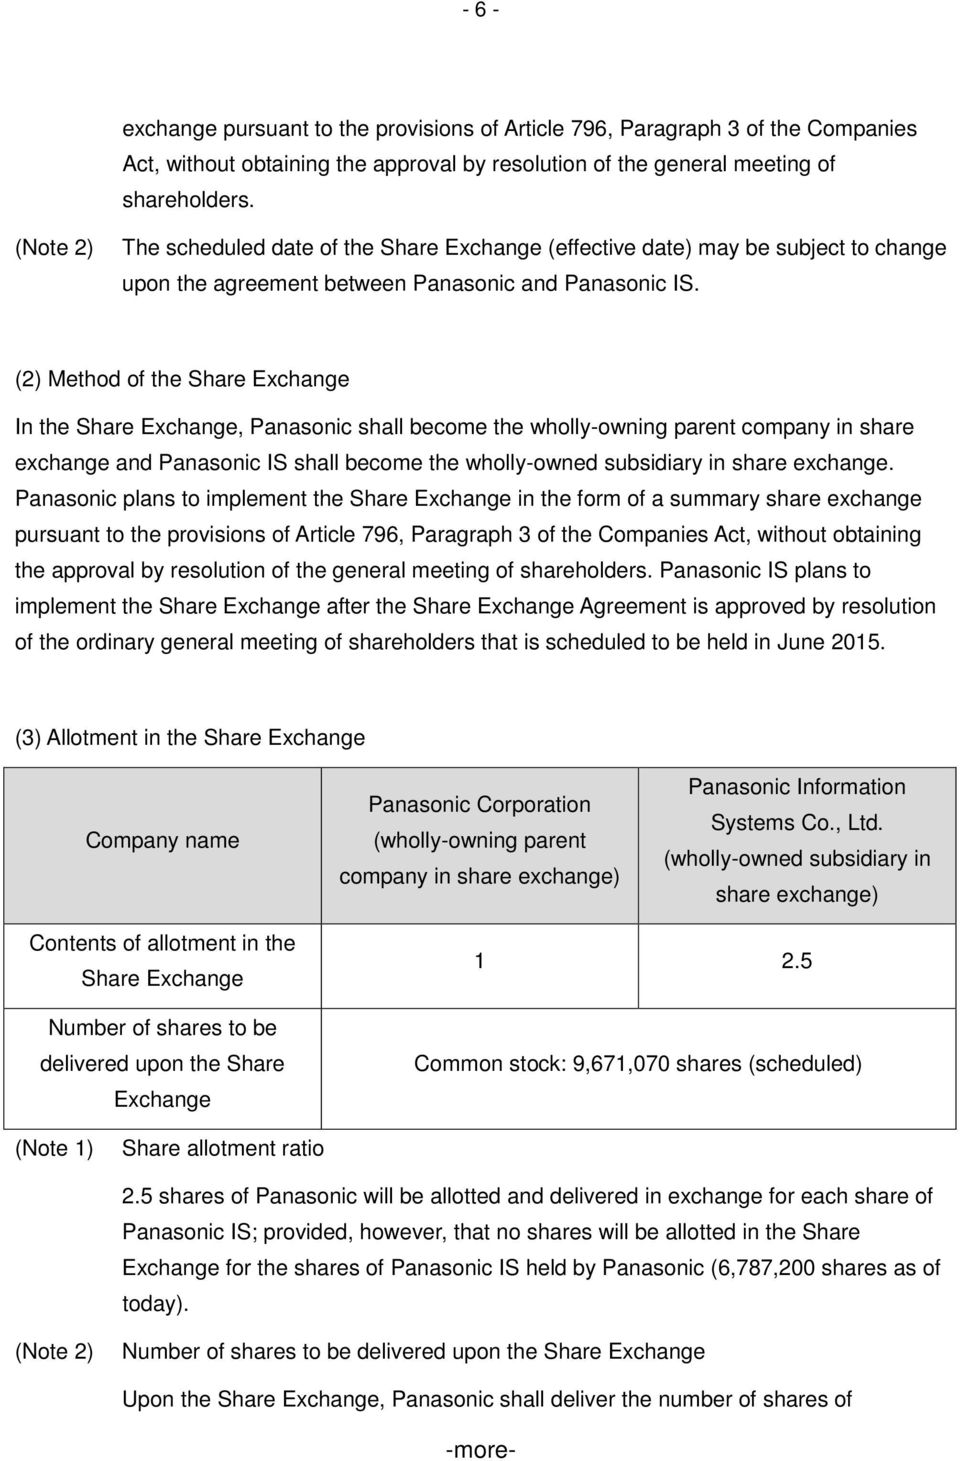 (2) Method of the Share Exchange In the Share Exchange, Panasonic shall become the wholly-owning parent company in share exchange and Panasonic IS shall become the wholly-owned subsidiary in share